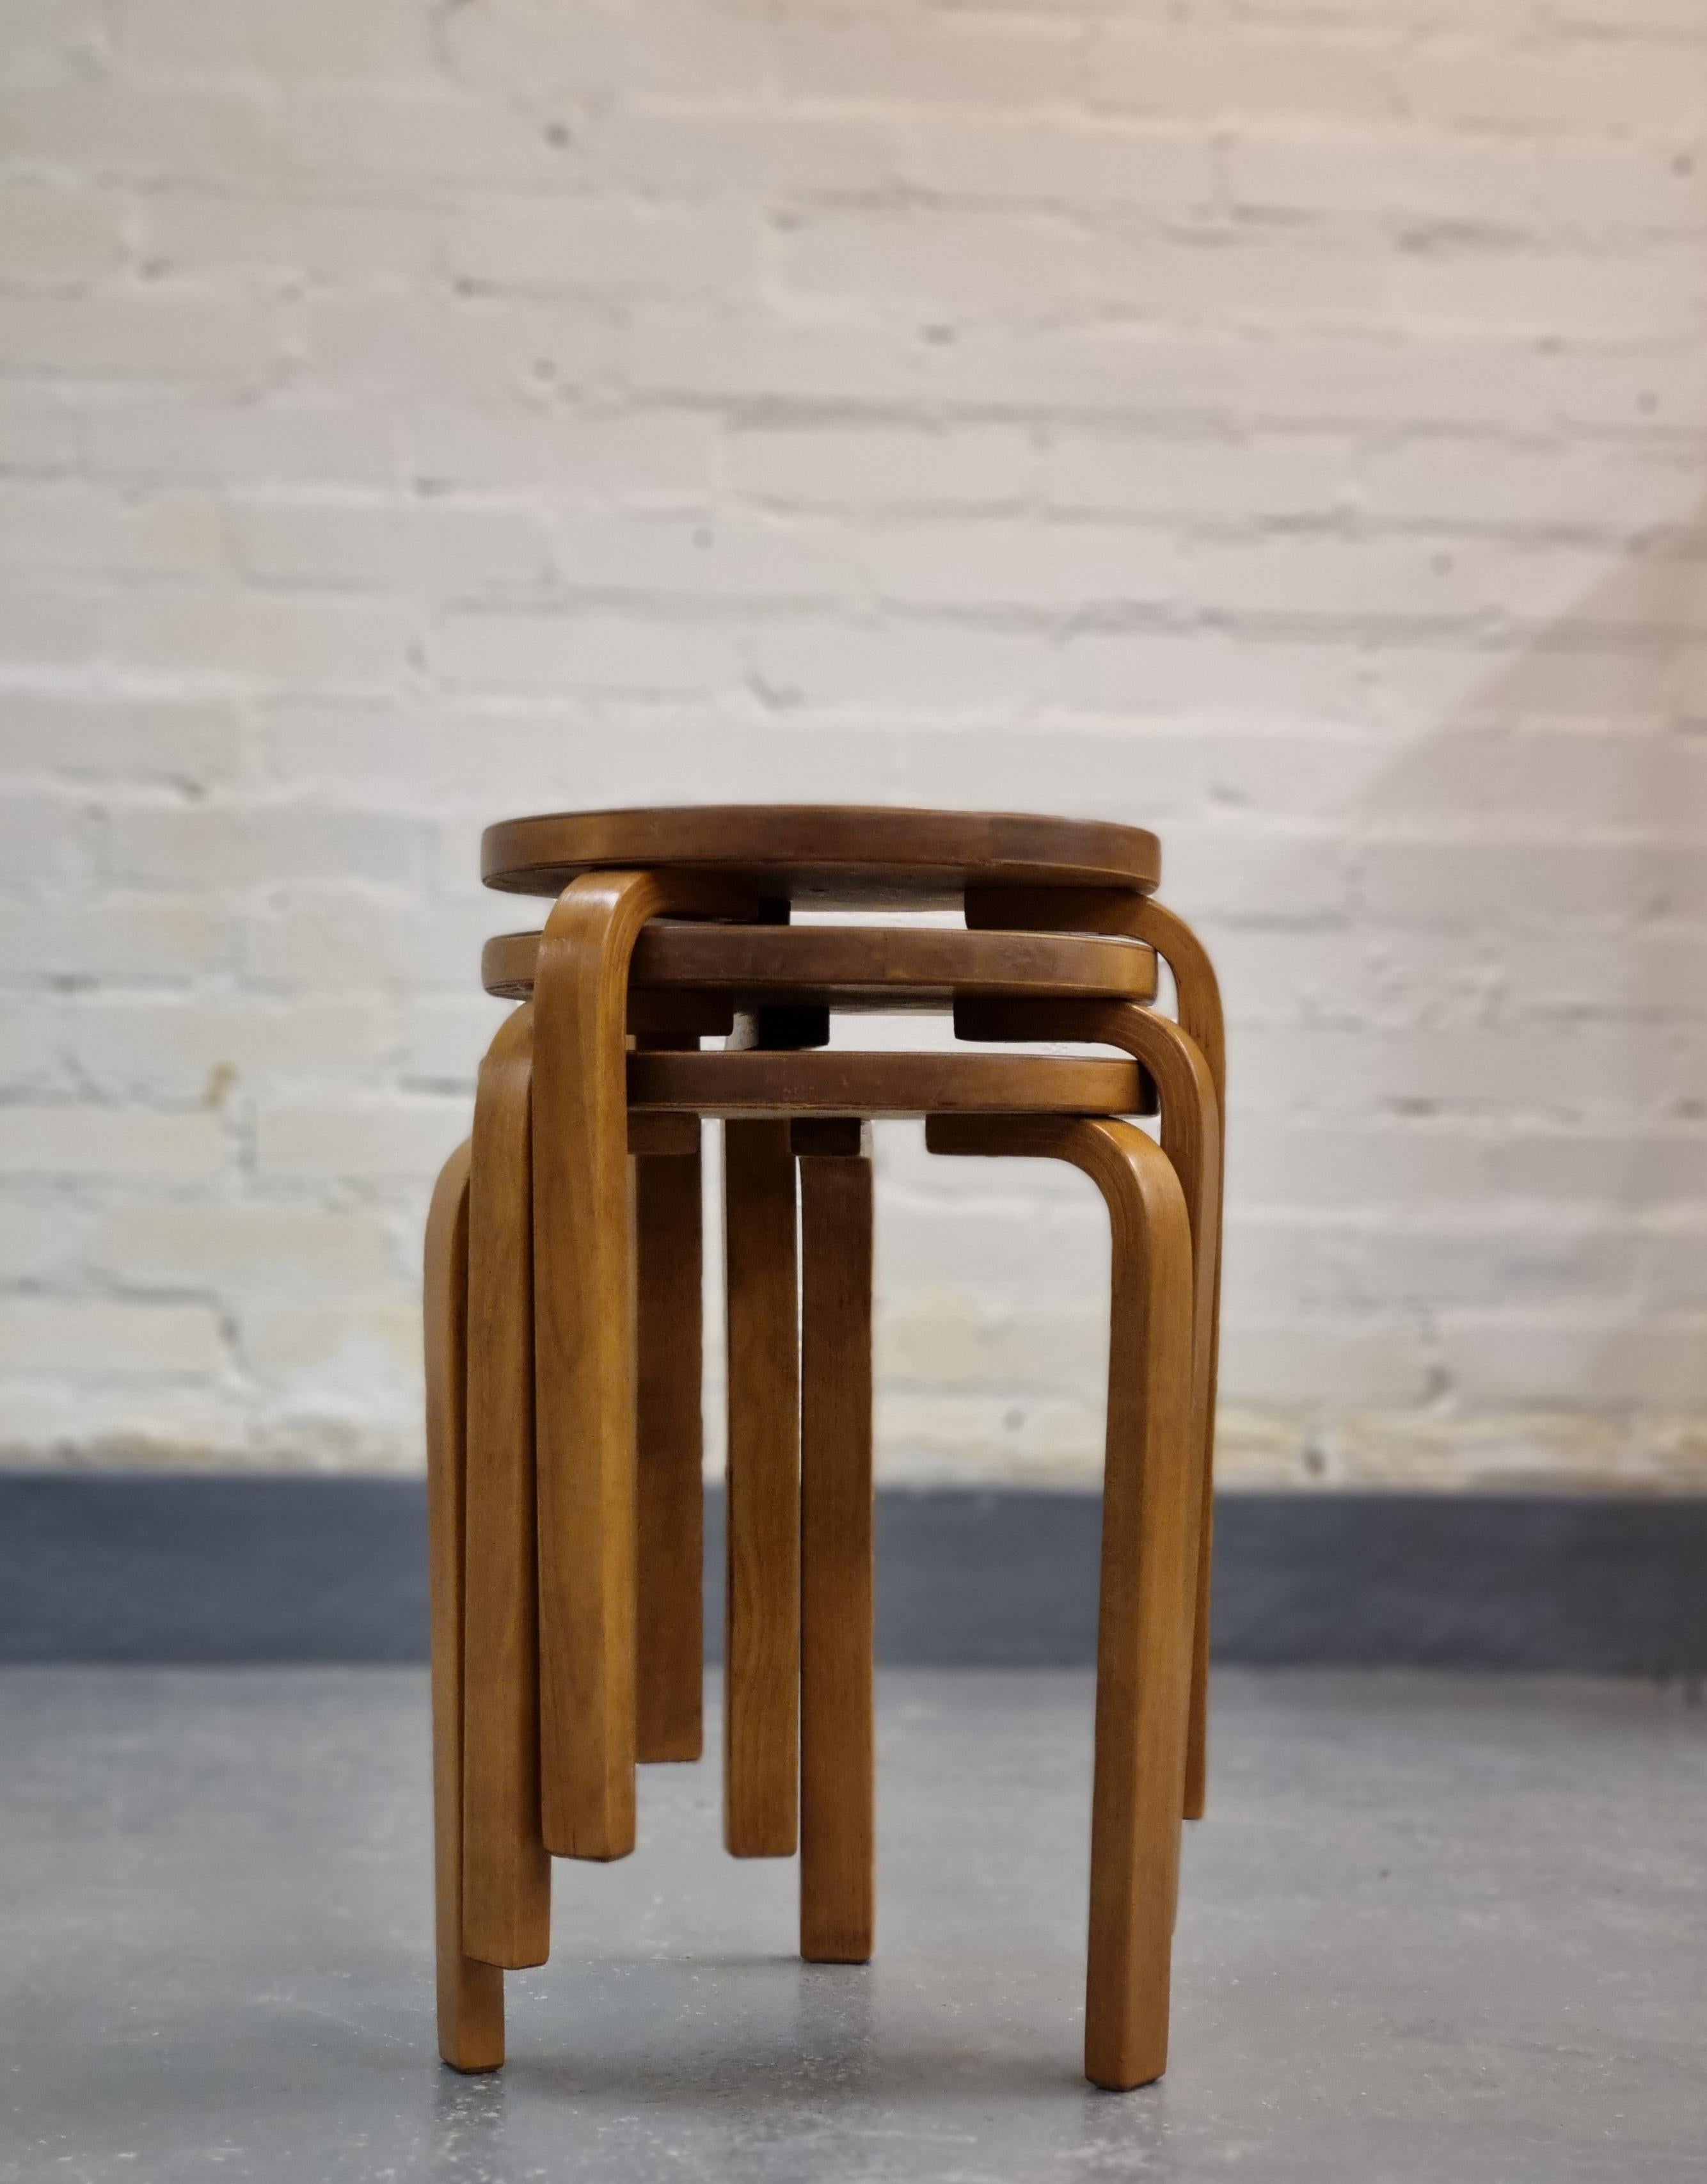 A beautiful set of three commisioned iconic 60 stool. These stools are higher than the standard model and stand at a height of.
The stools are in birch and have a beautiful patina. The surface is slightly refinished.
We offer free shipping on this